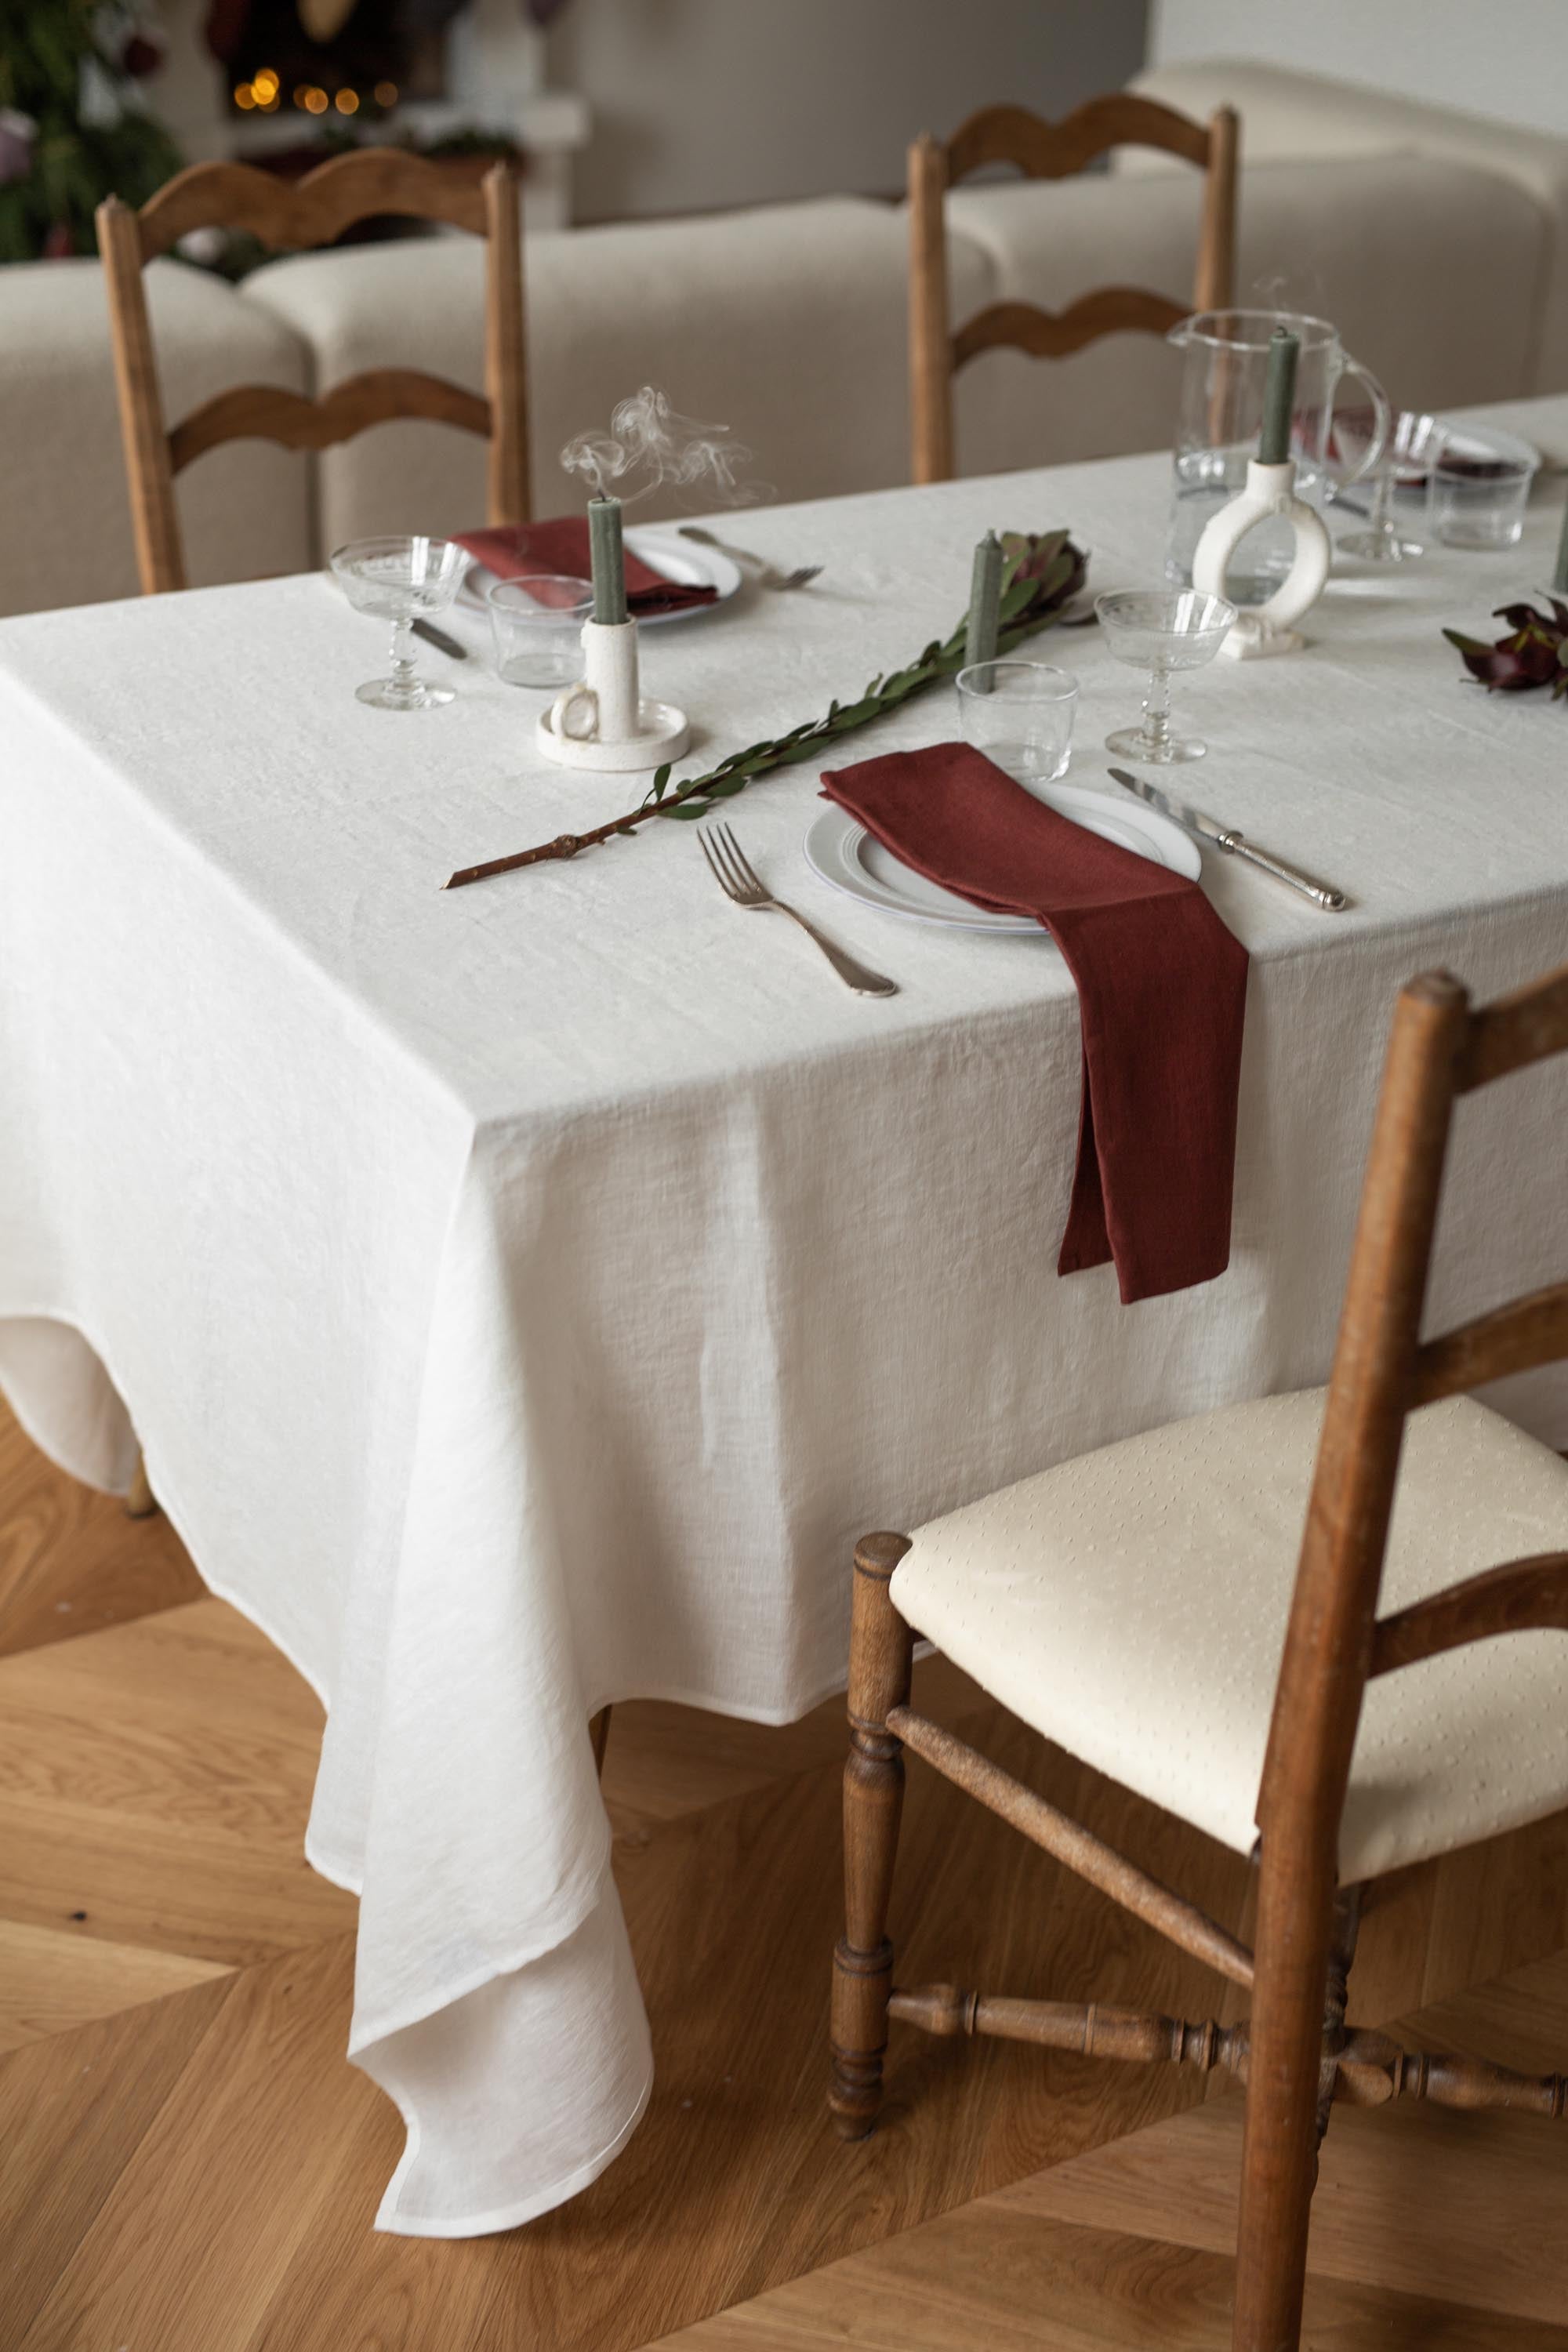 Set Dinner Table With White Linen Tablecloth By AmourLinen